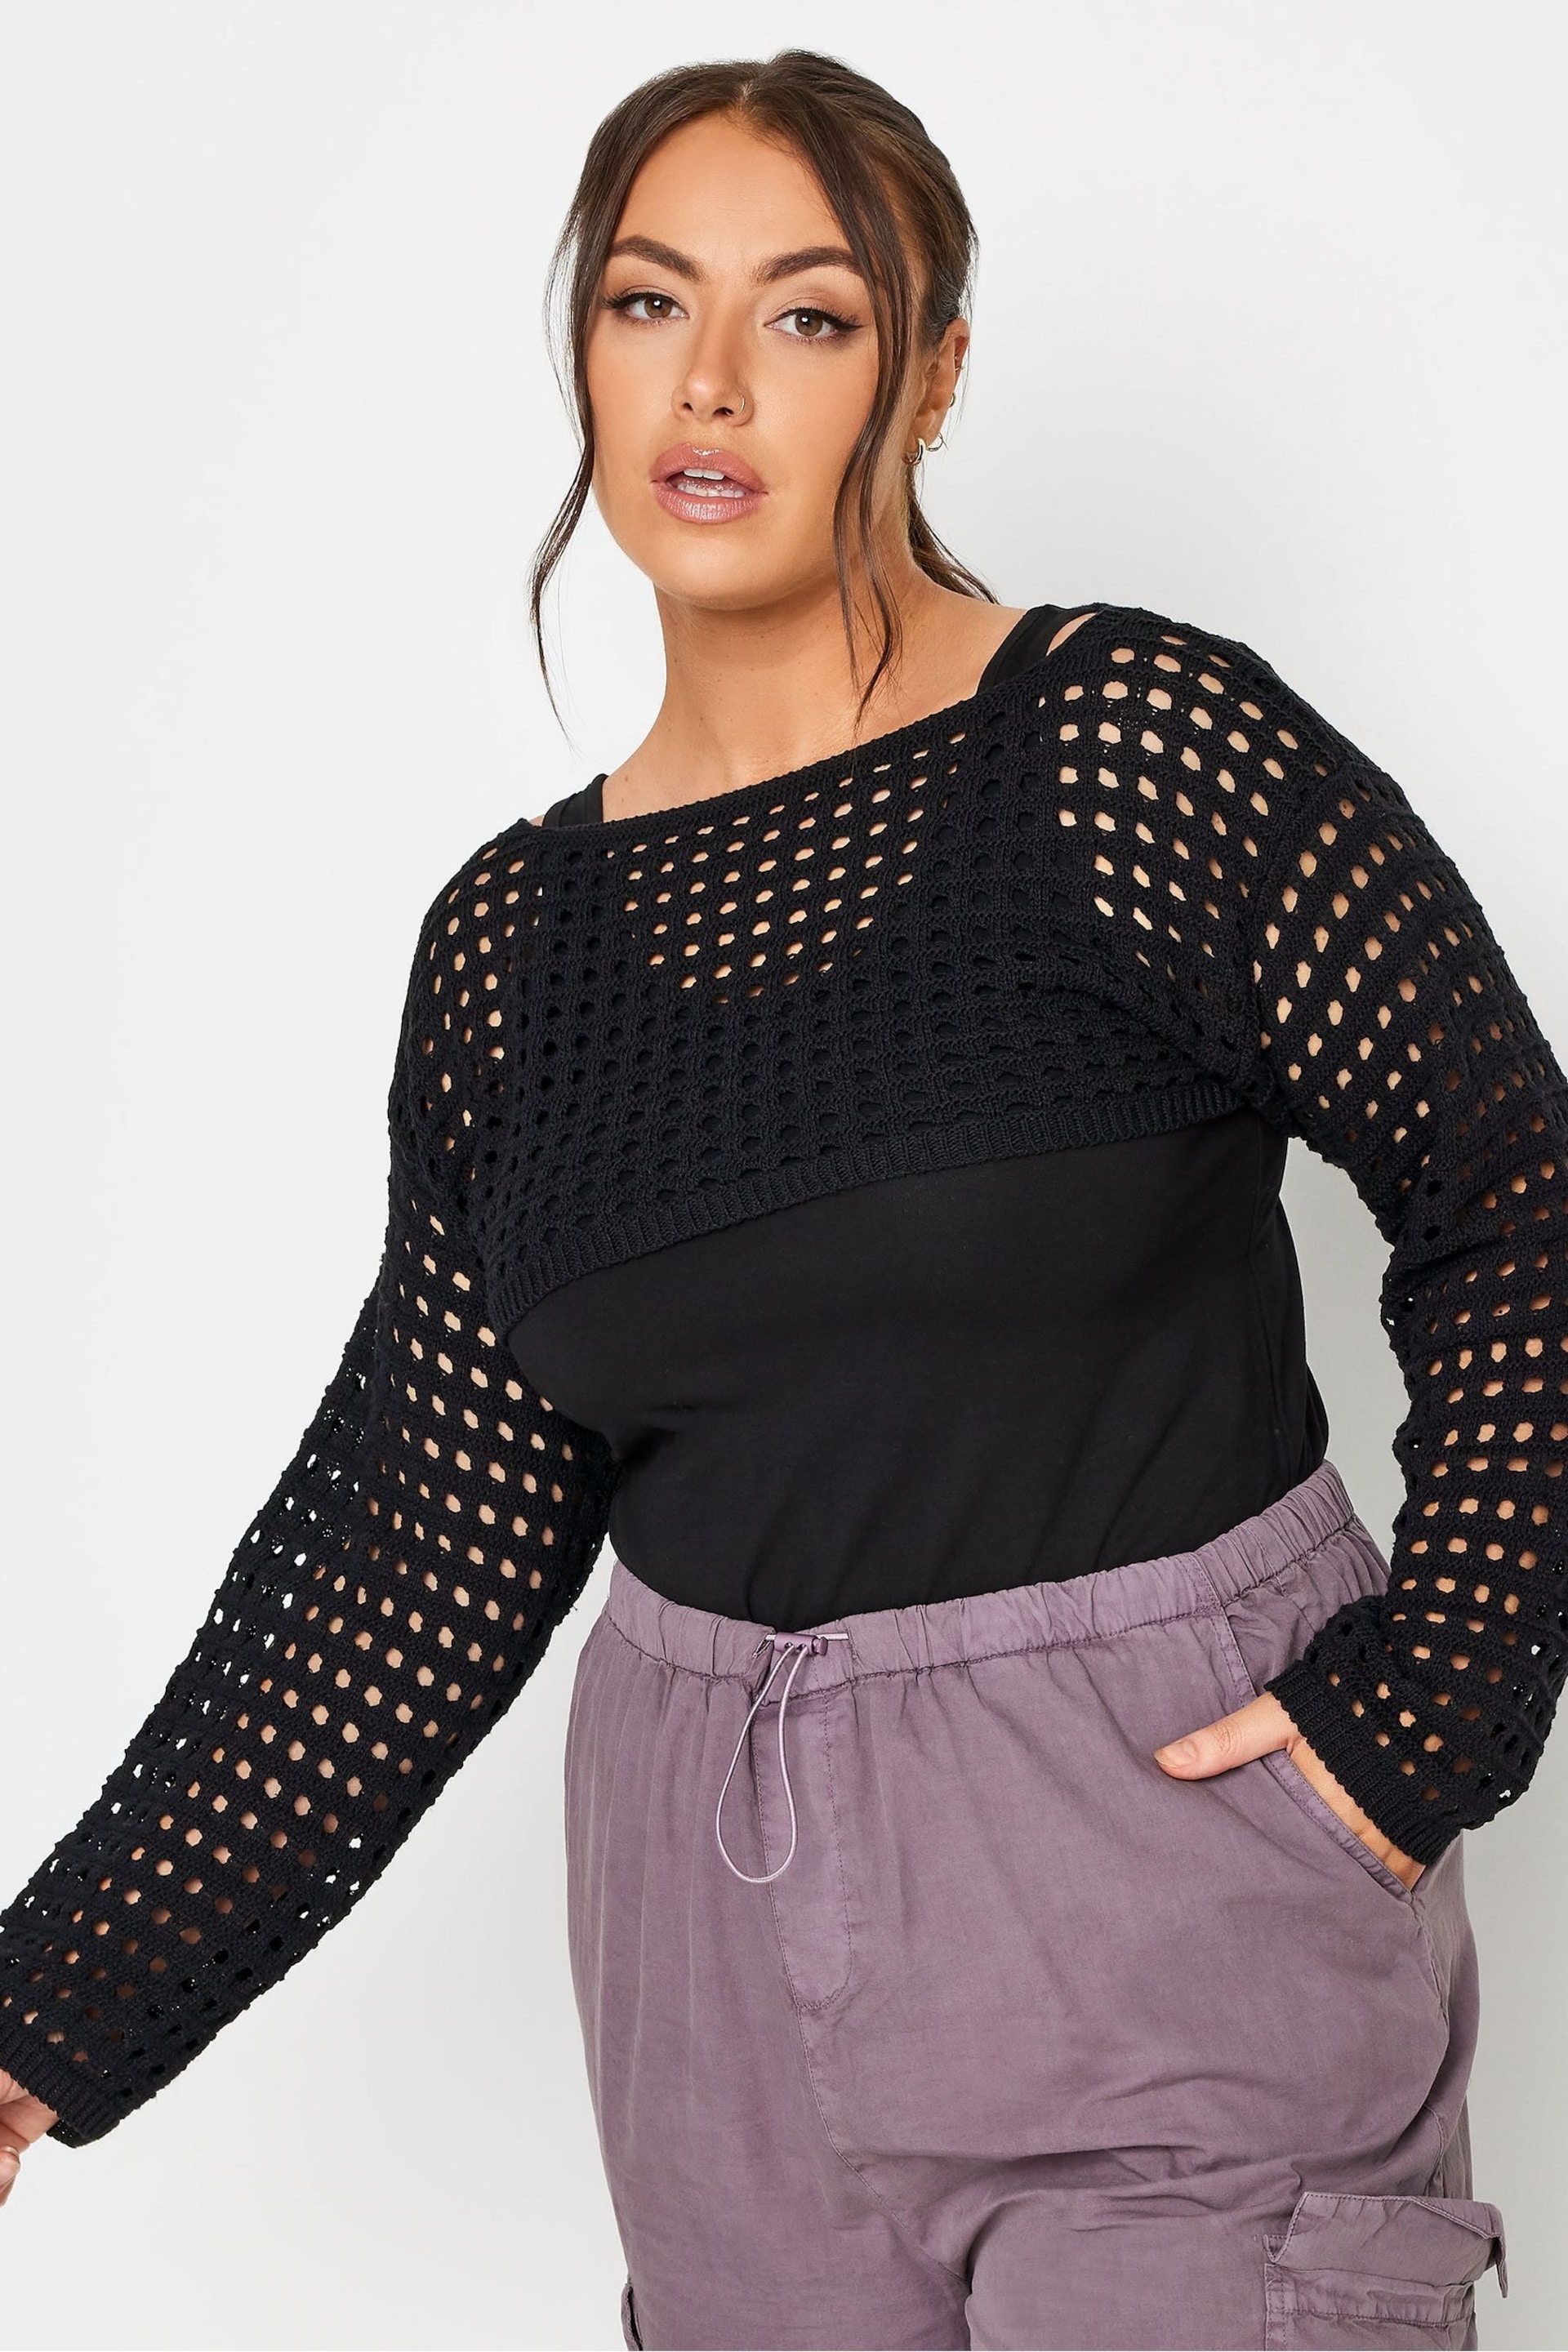 Yours Curve Black Limited Cropped Knit Armwarmer Jumper - Image 1 of 4